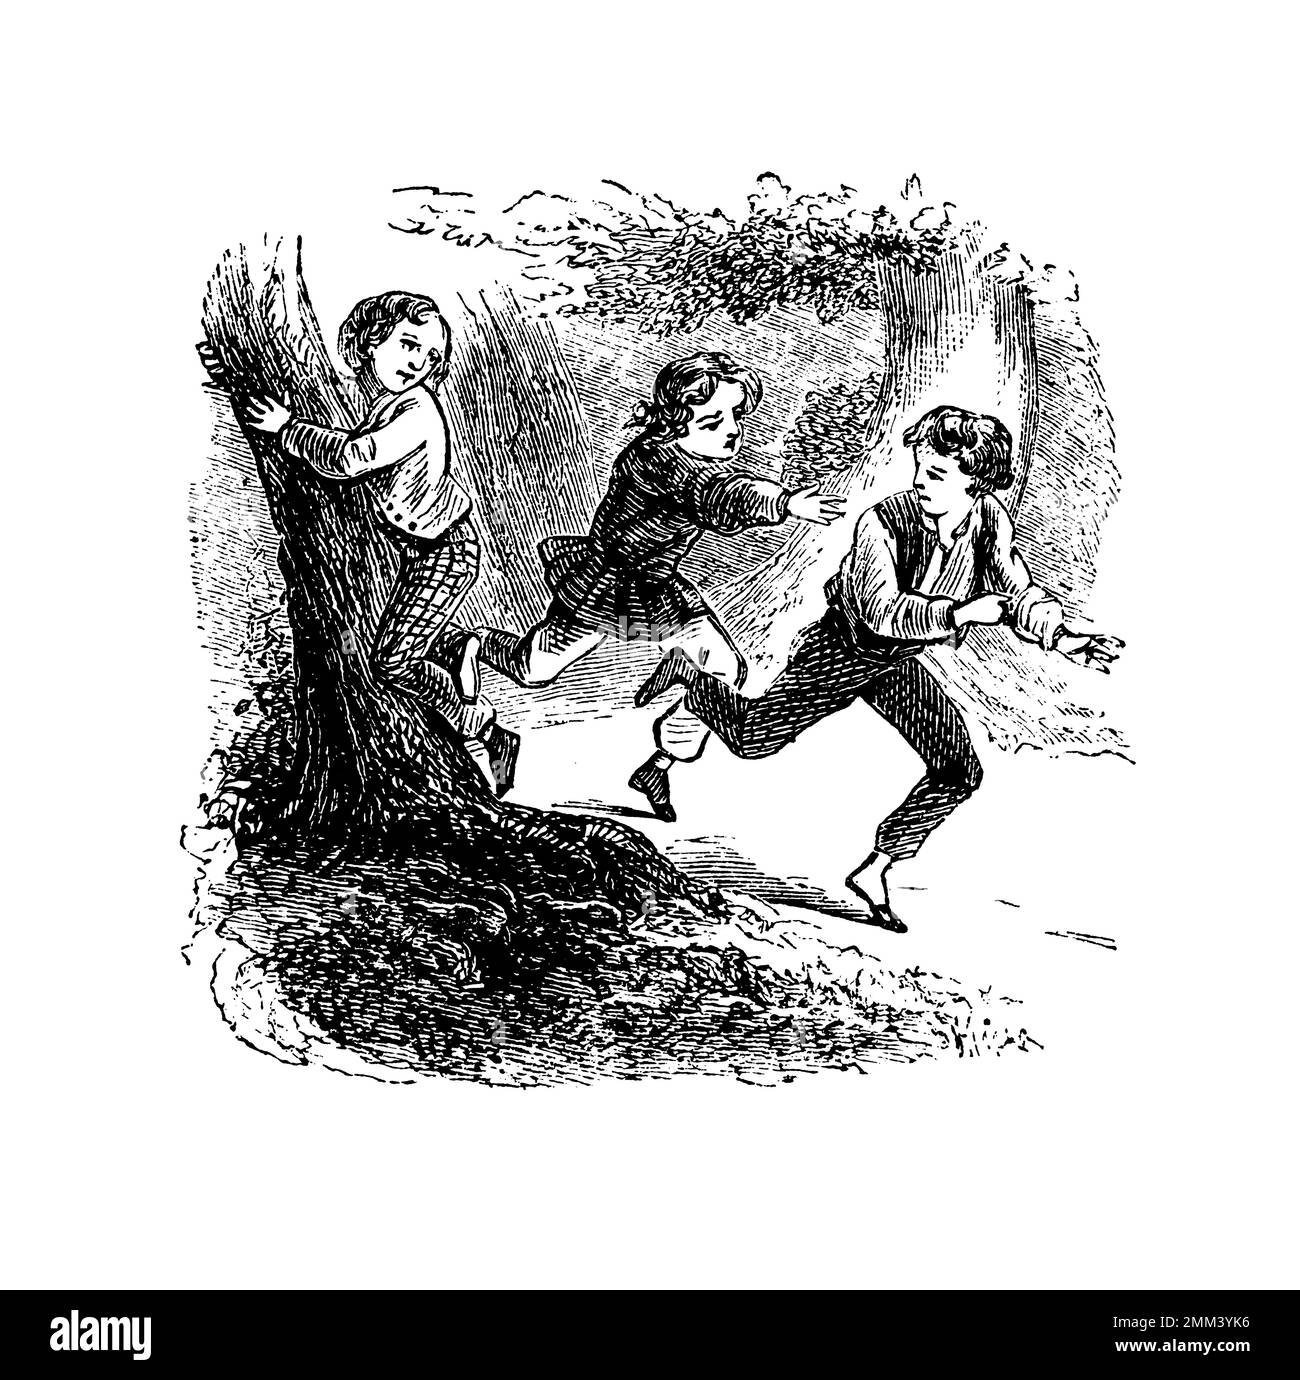 Antique illustration of tag, an outdoor game that involves one player chasing other players in an attempt to tag or touch them. Published in American’ Stock Photo